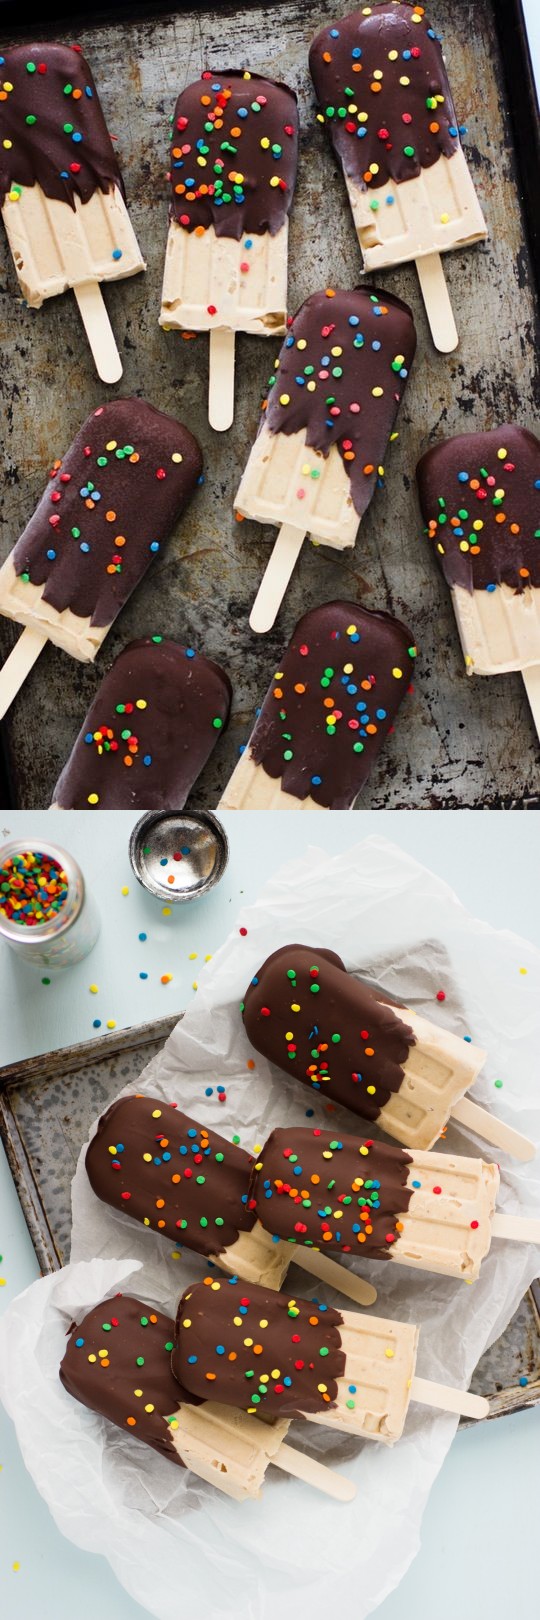 3-Ingredient Peanut Butter and Banana Popsicles